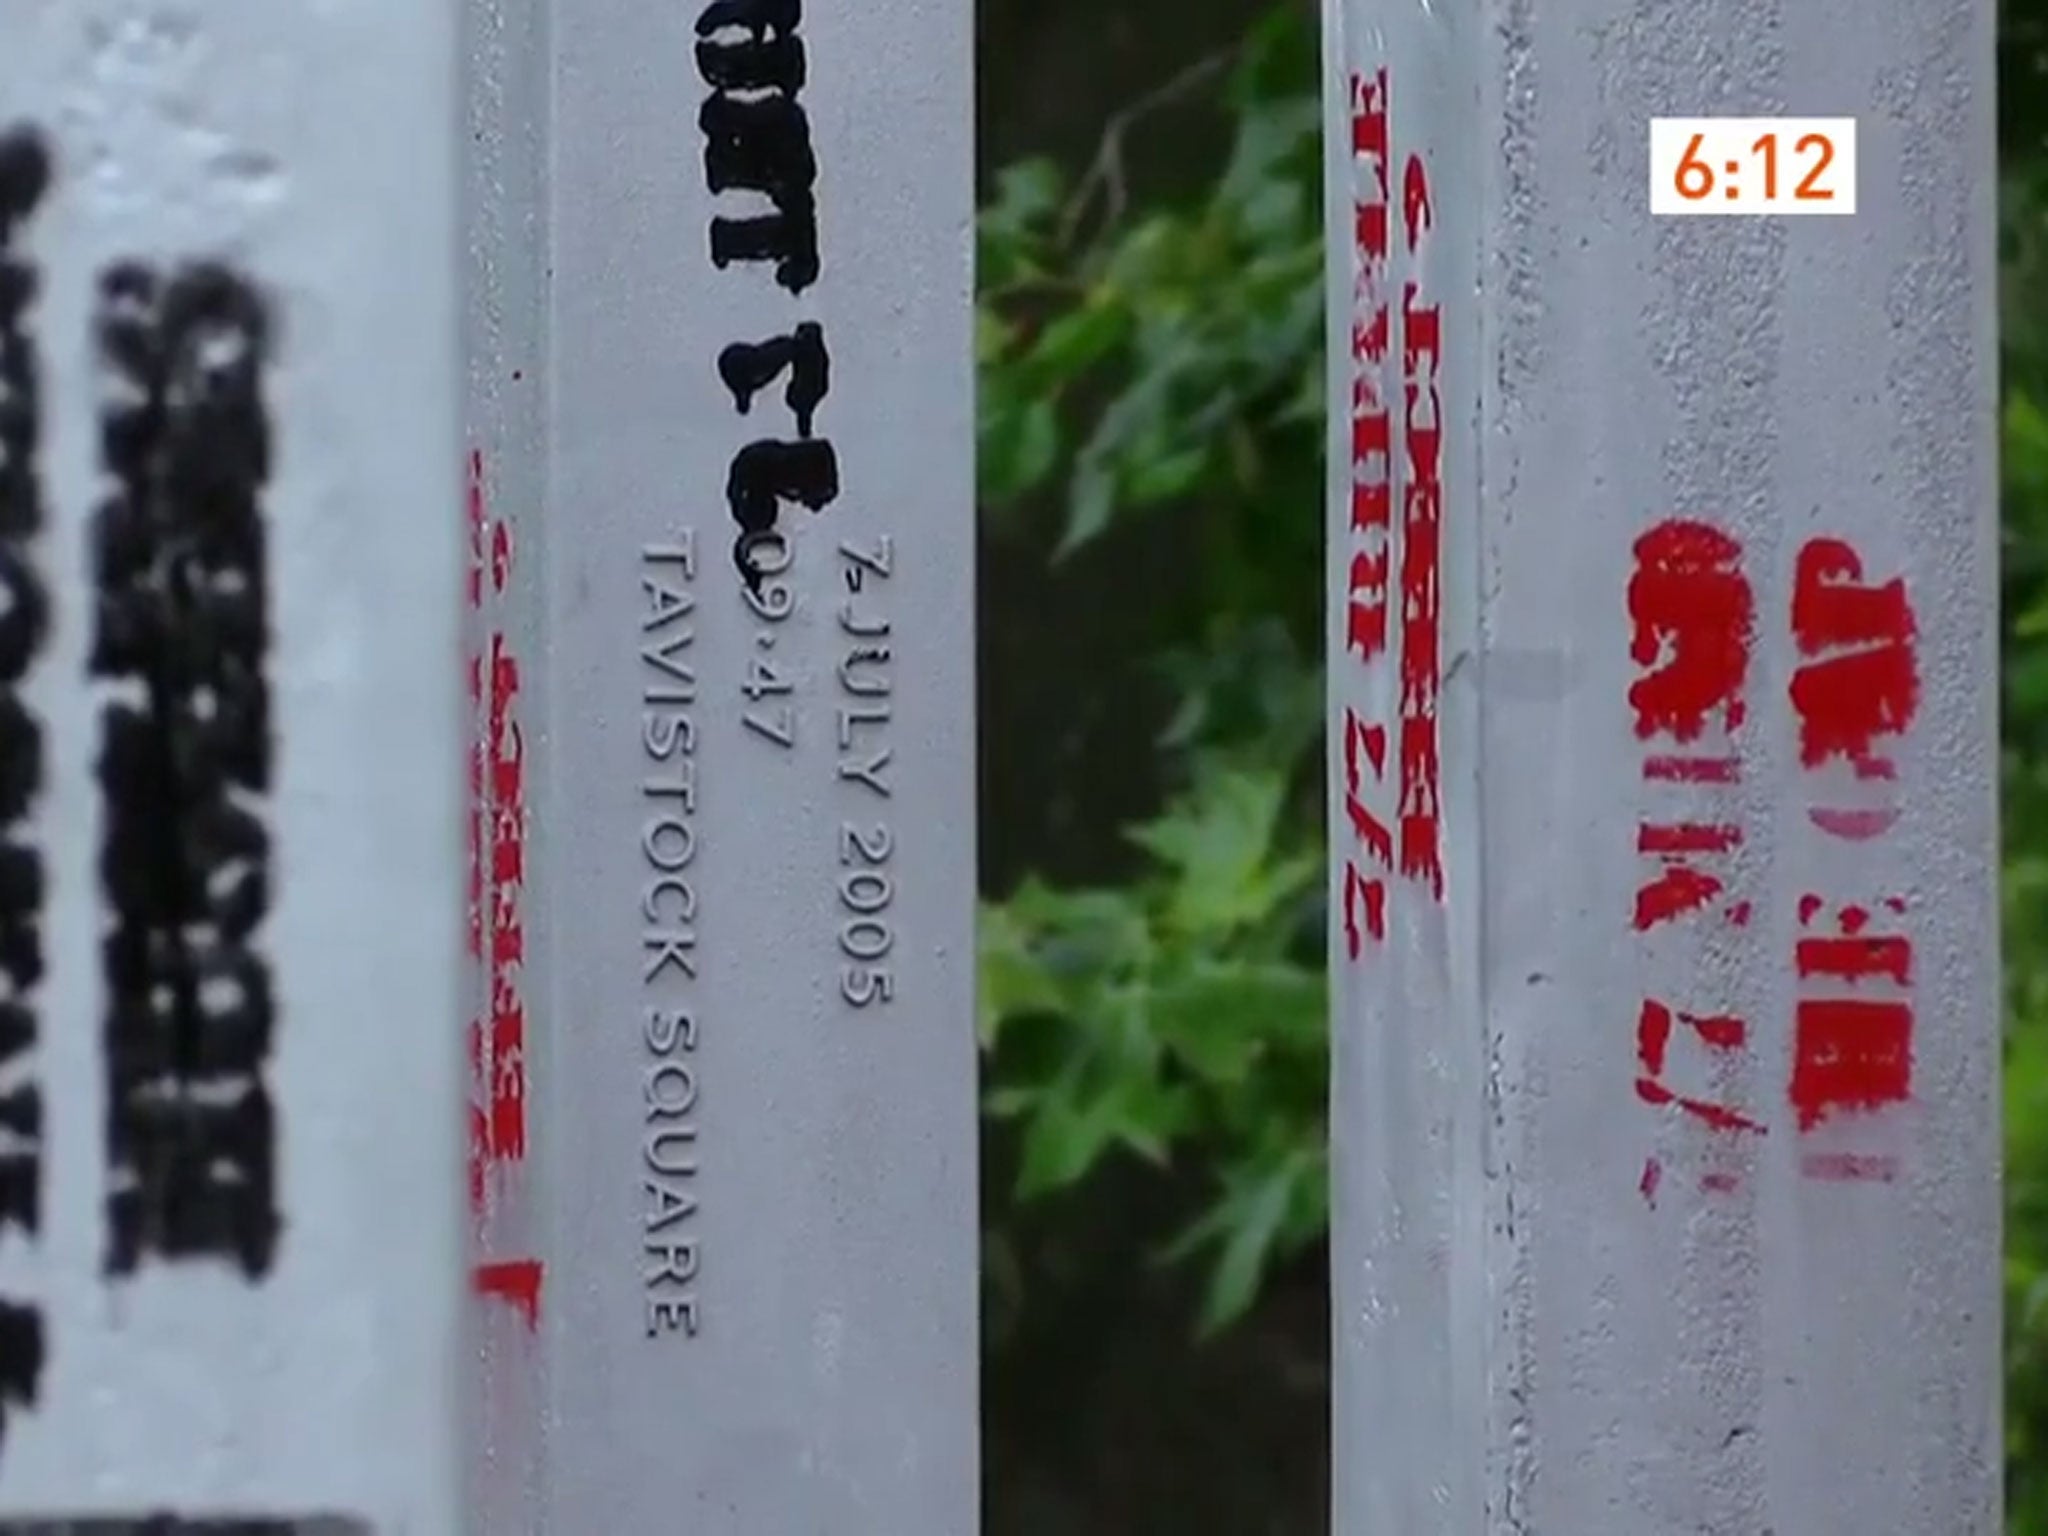 This London Live screengrab shows the graffiti on three of the 52 pillars dedicated to the victims of the 2005 bombings